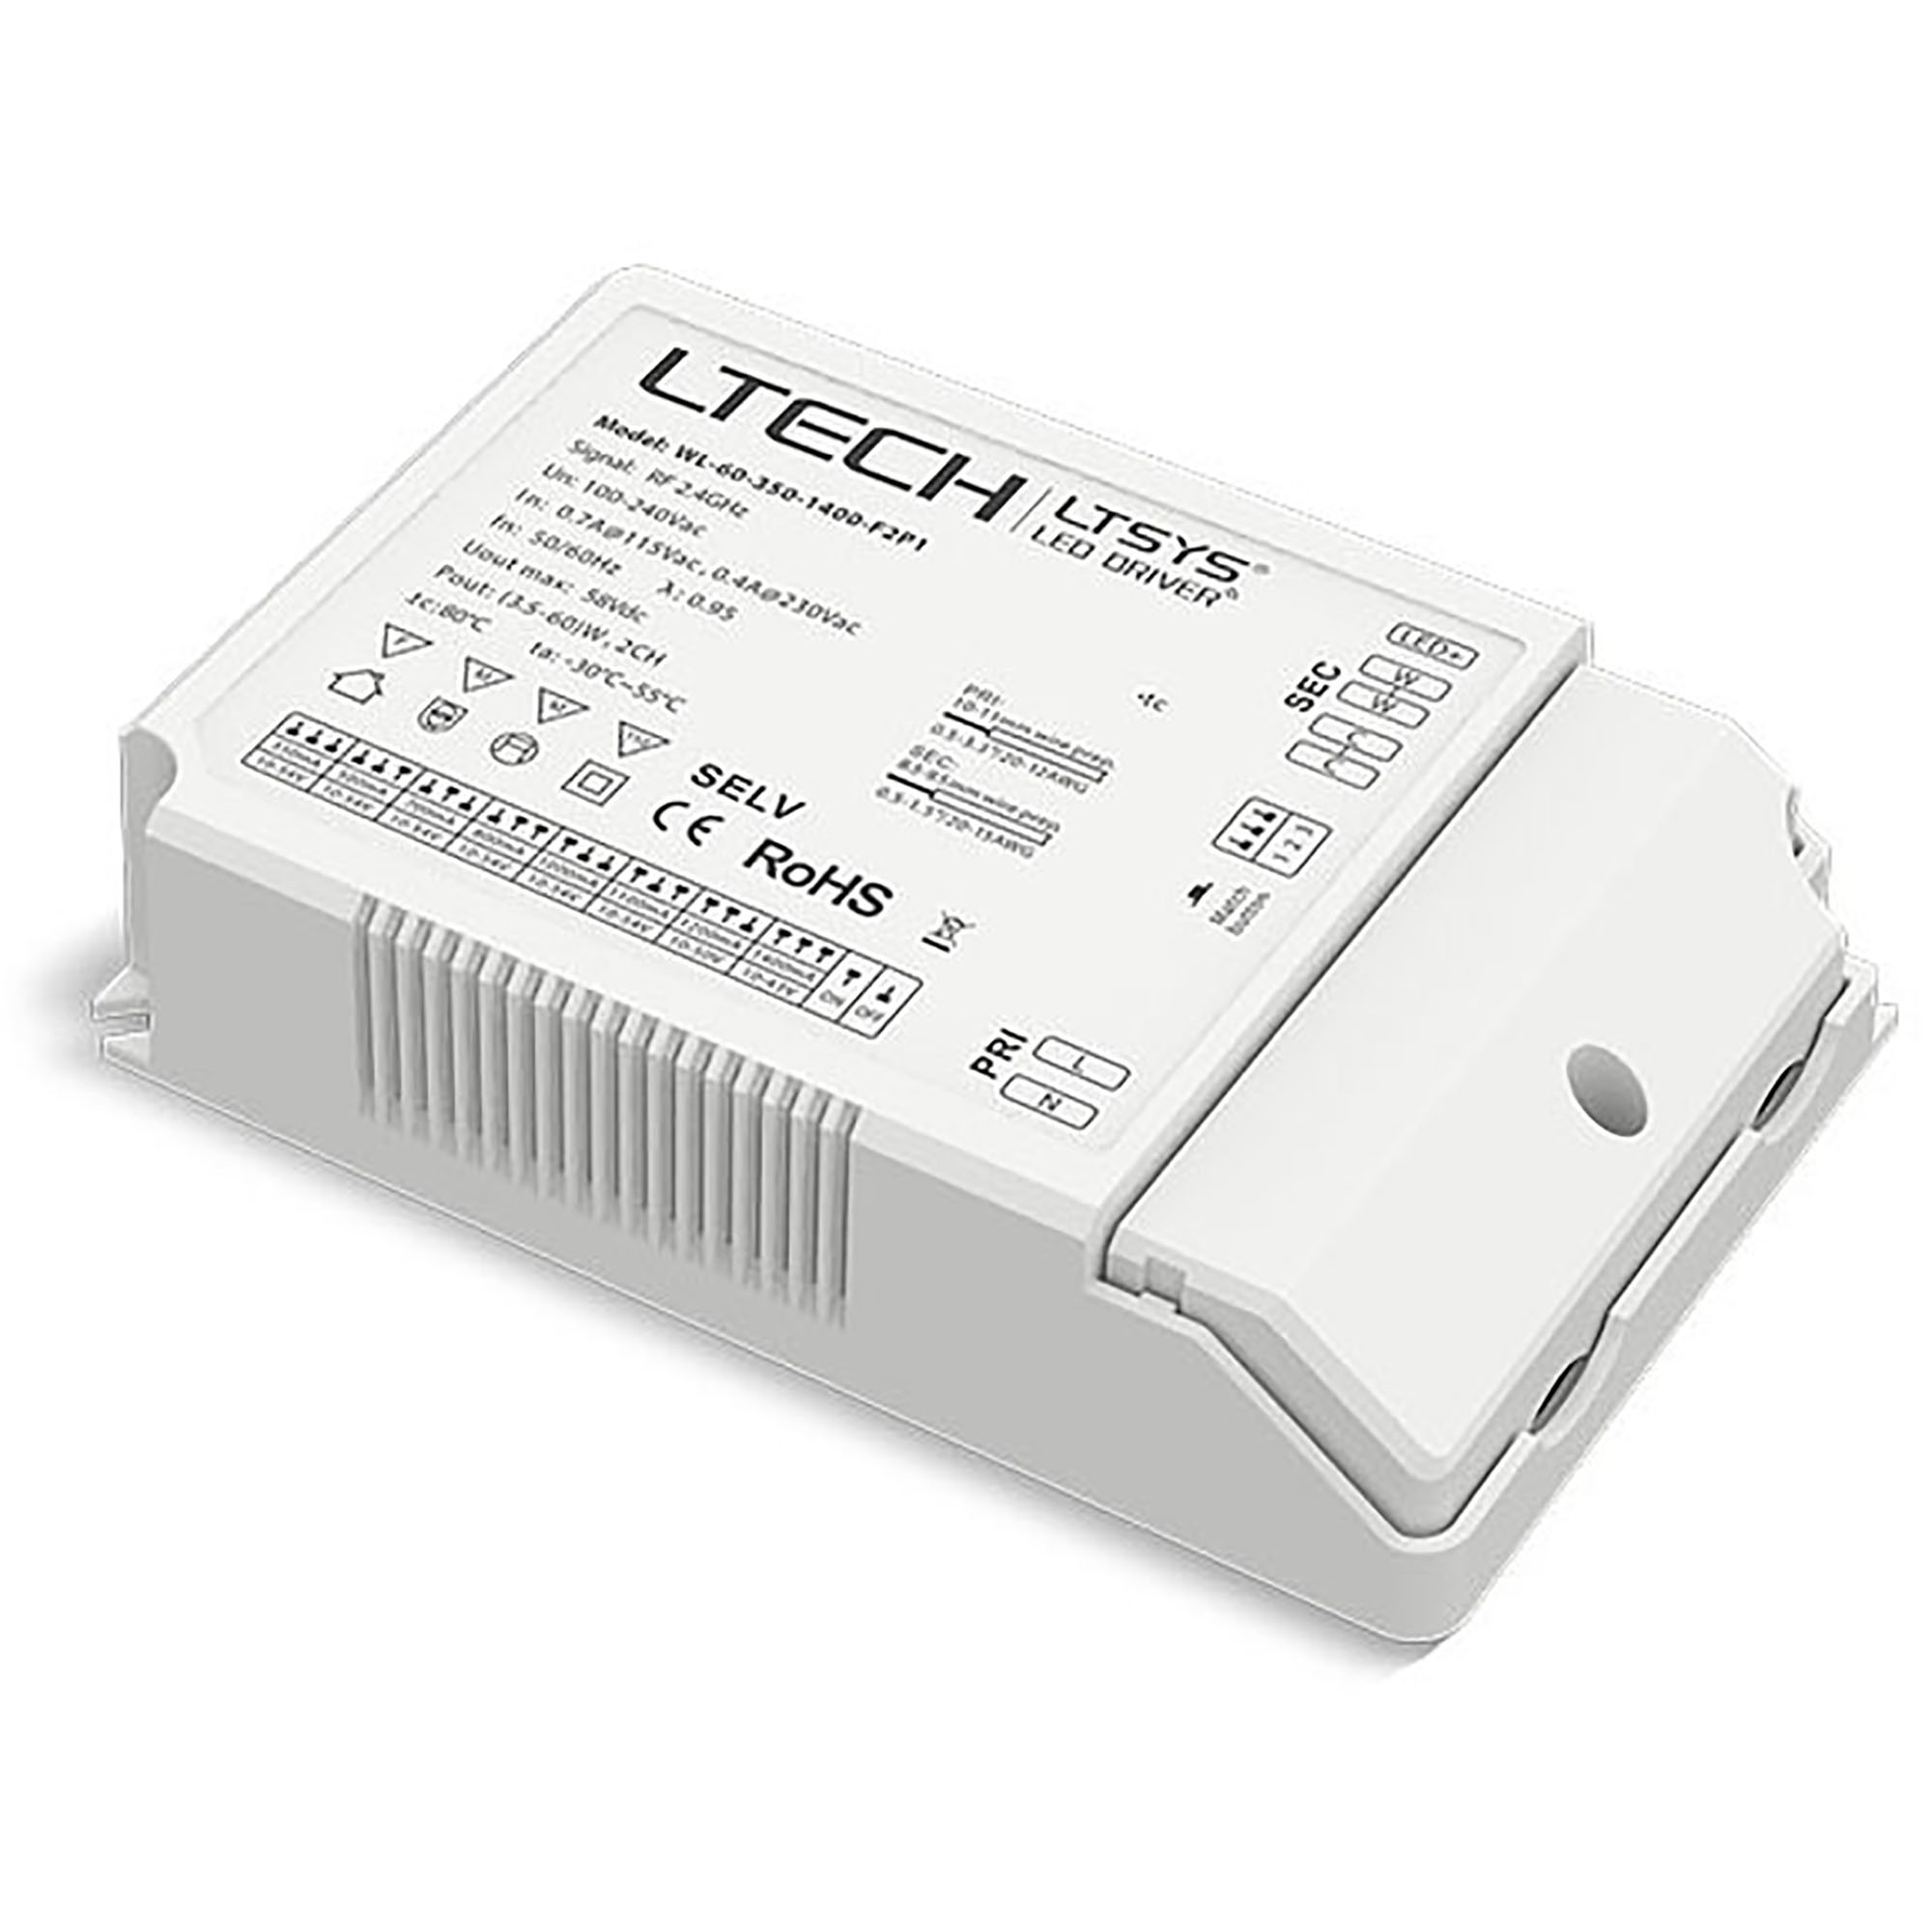  Drivers LTECH Dimming Controls